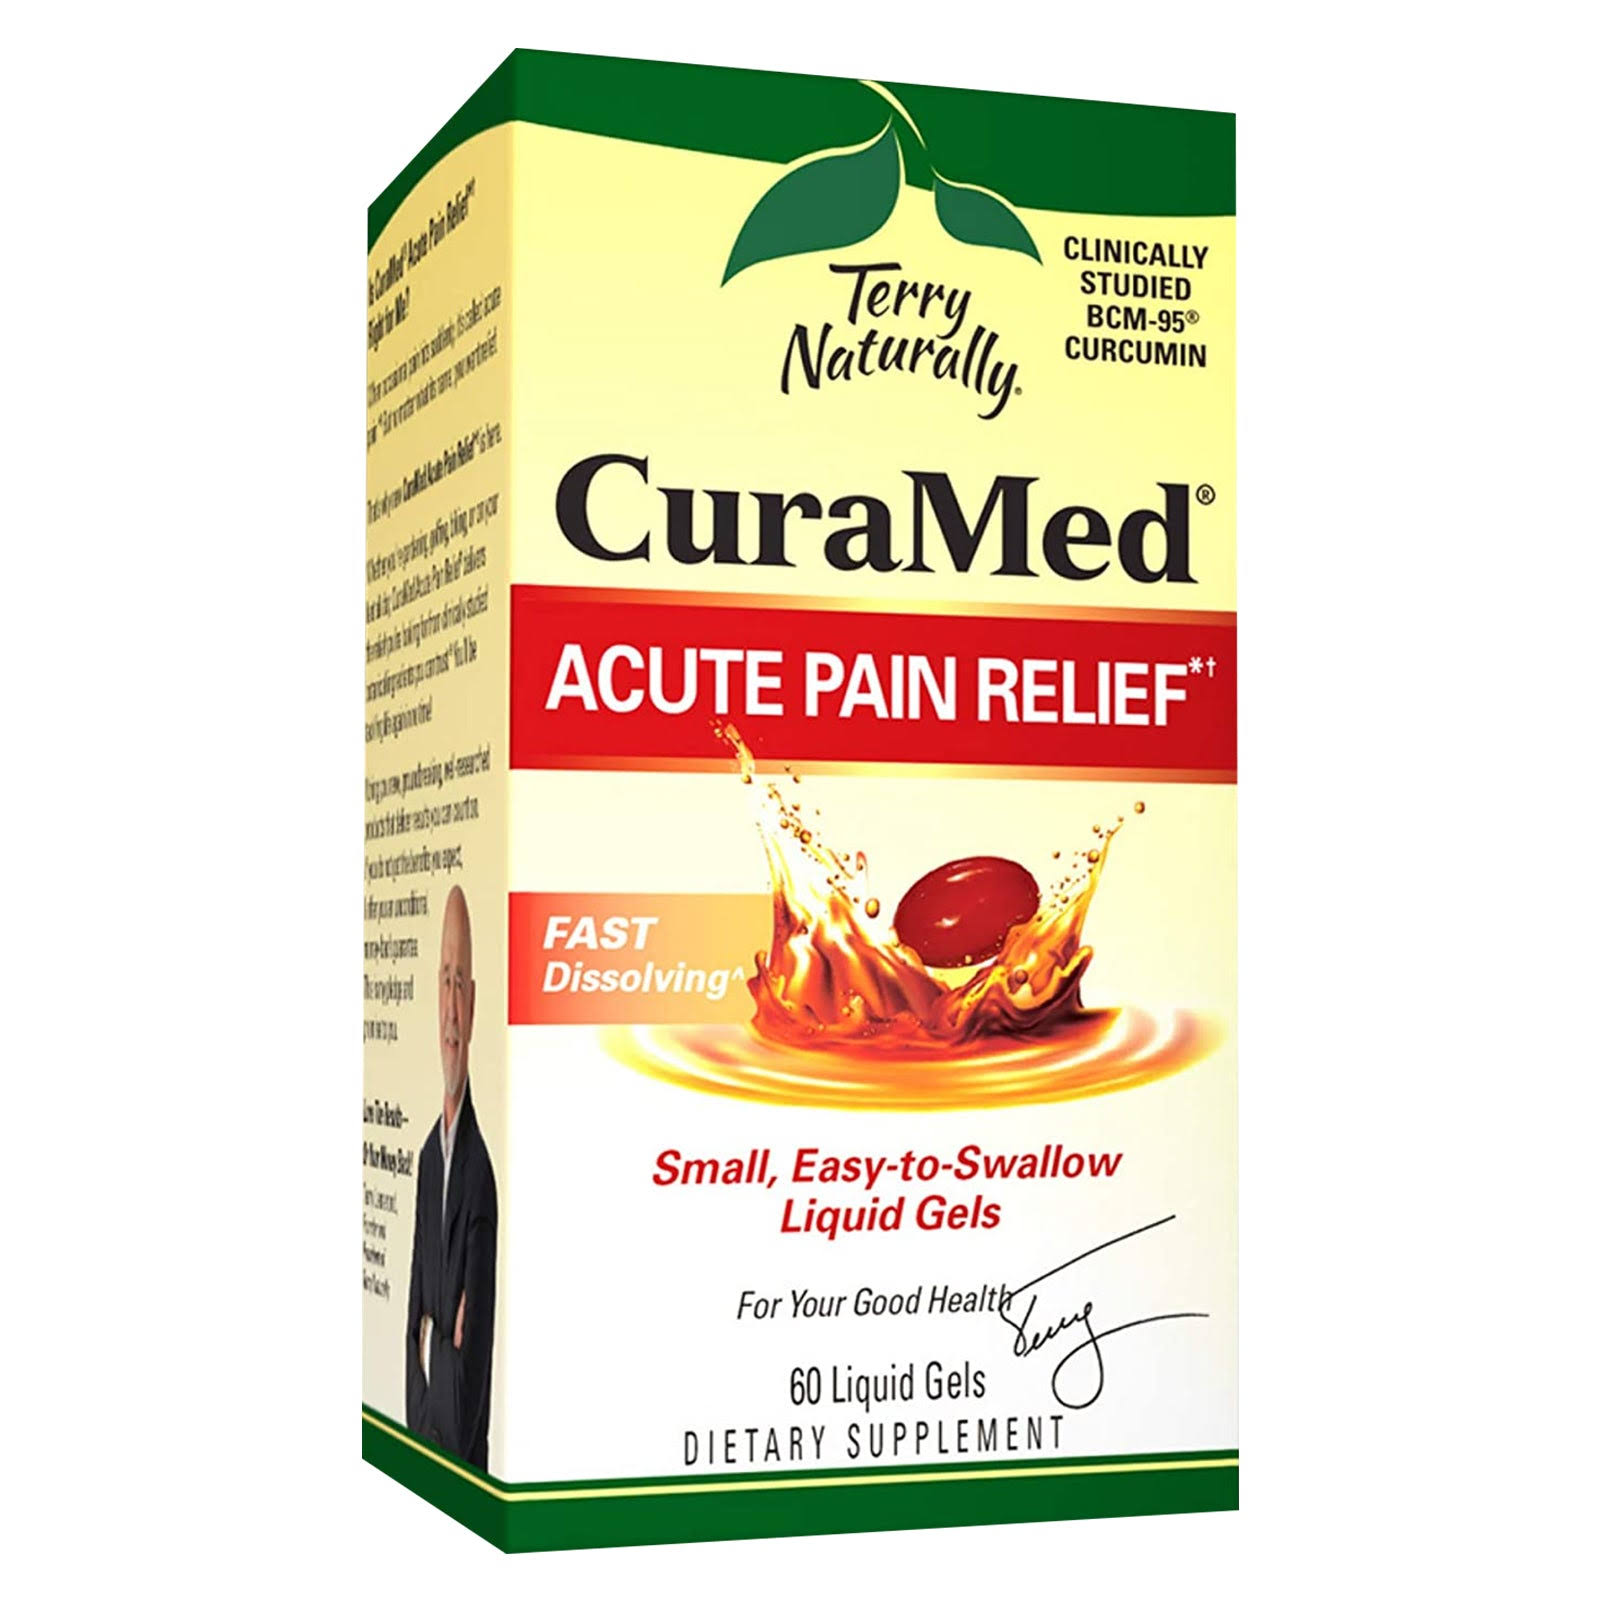 Terry Naturally CuraMed Acute Pain Relief 60 Liquid Gels